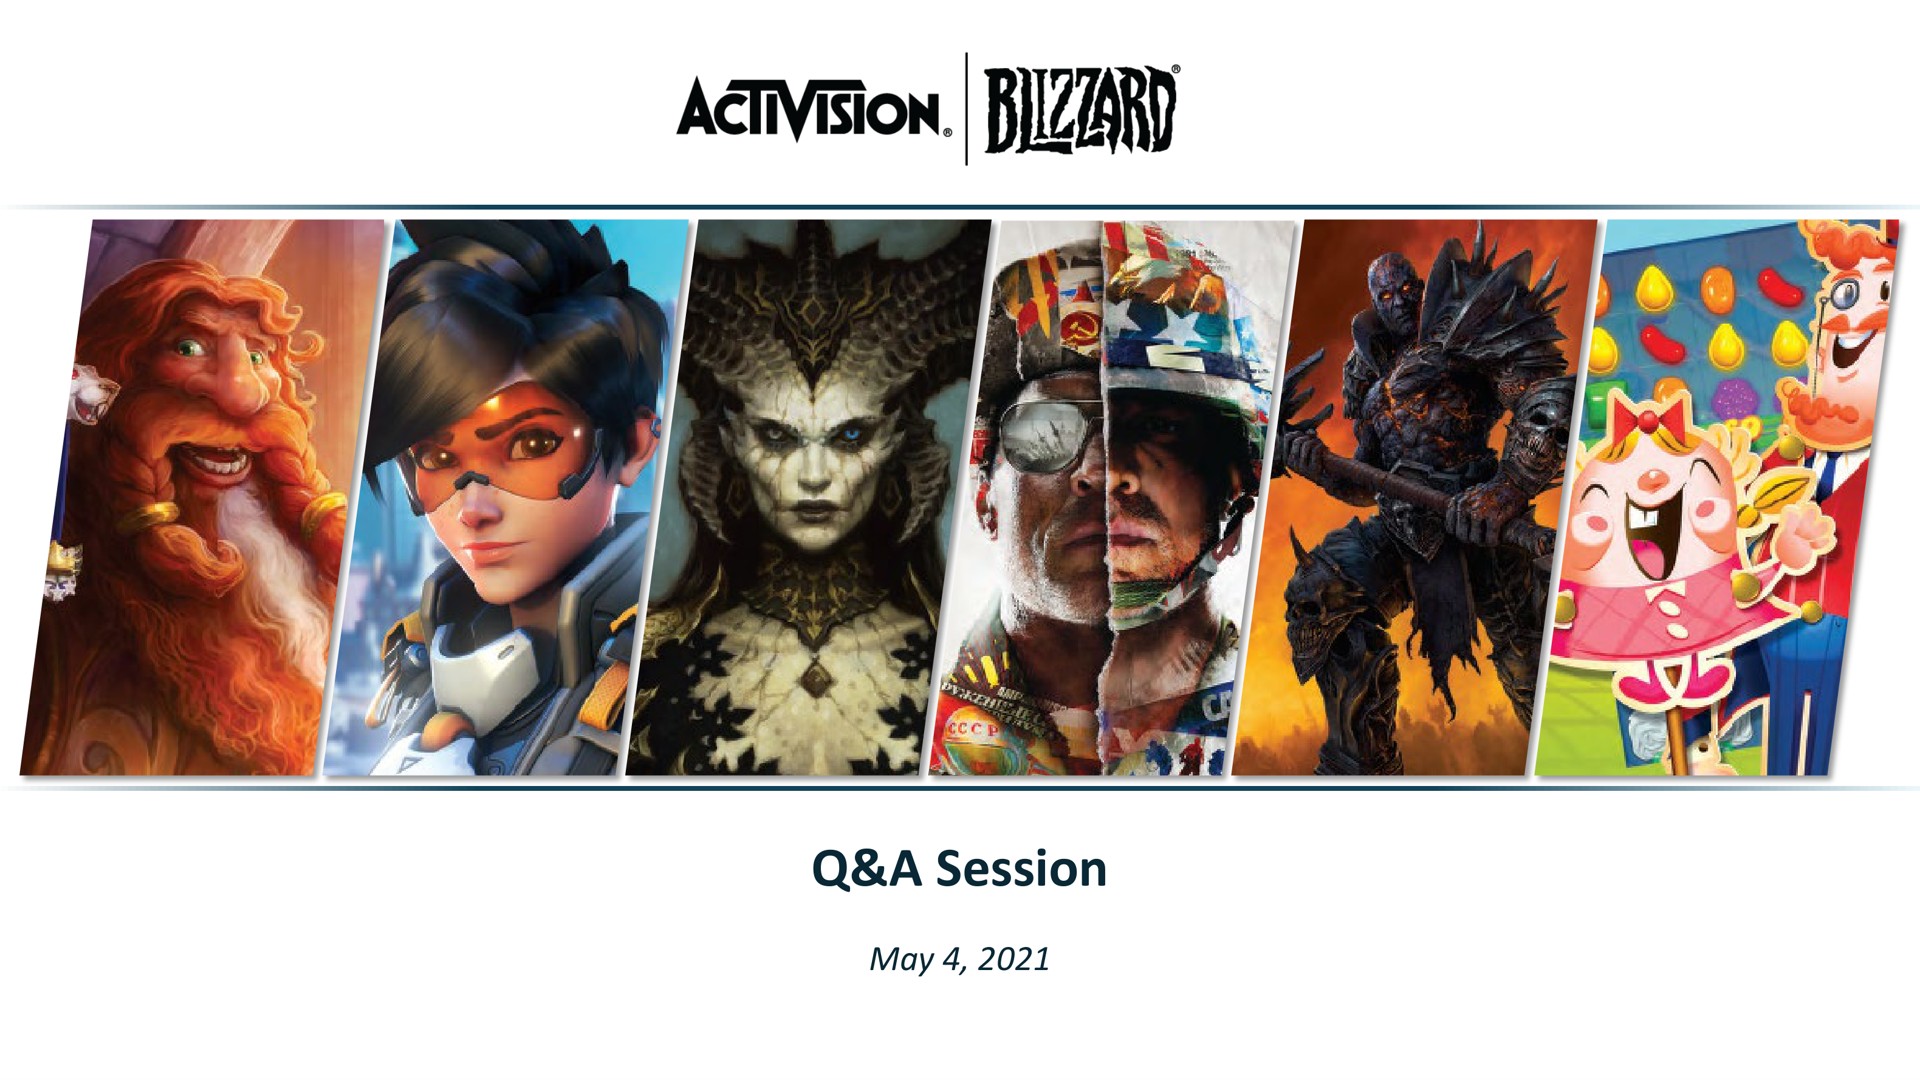 a session | Activision Blizzard